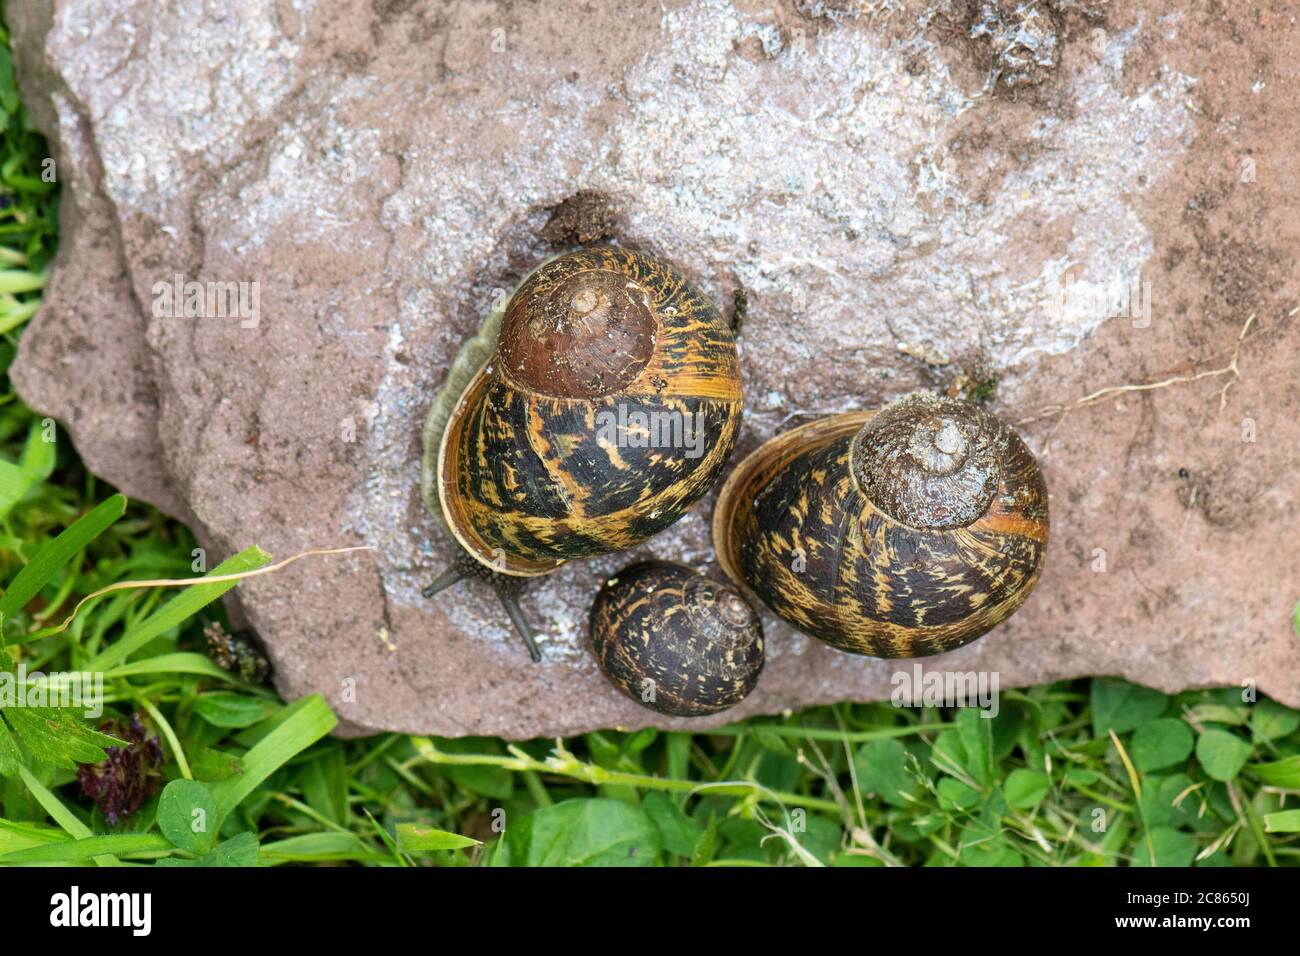 Garden Snails and silver slime trail - helix aspersa - on upturned stone - UK Stock Photo